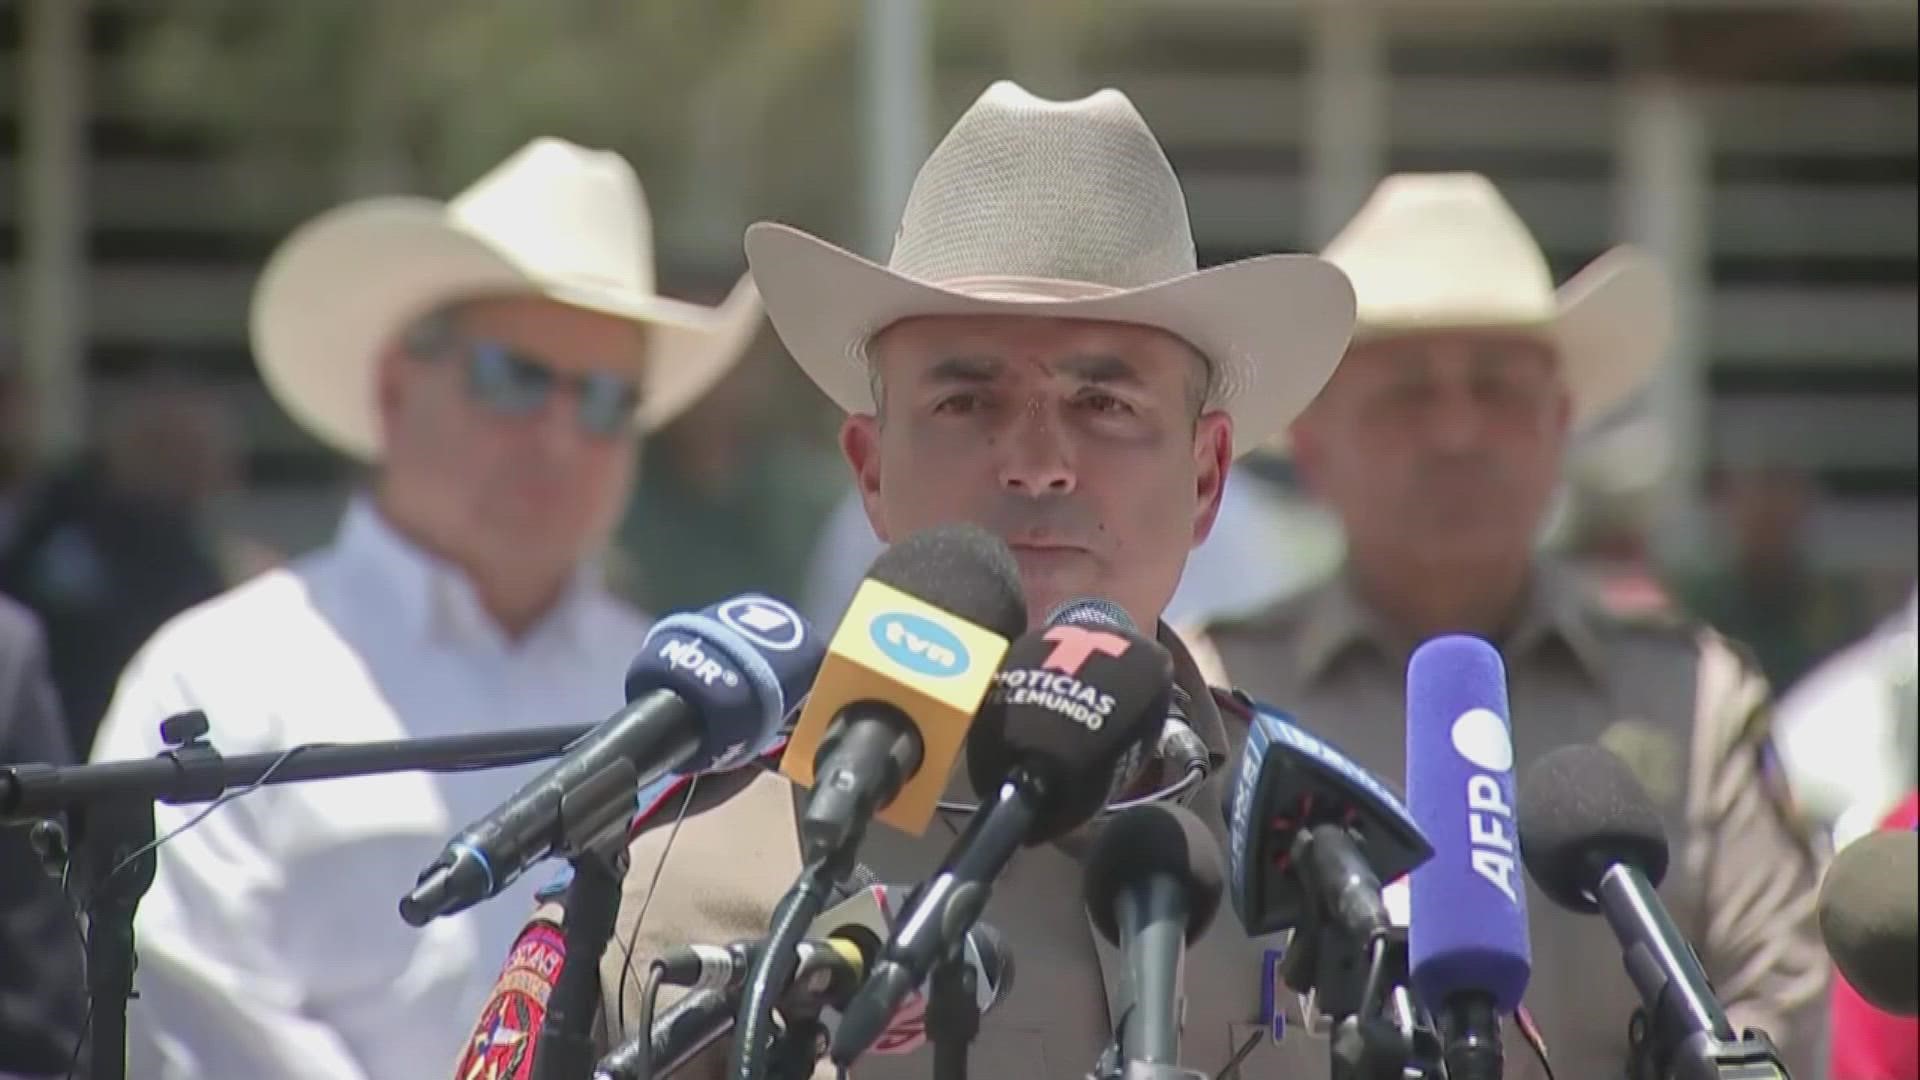 Texas Department of Public Safety officials outlined the initial timeline of how the Uvalde shooting happened at Robb Elementary and how police responded.